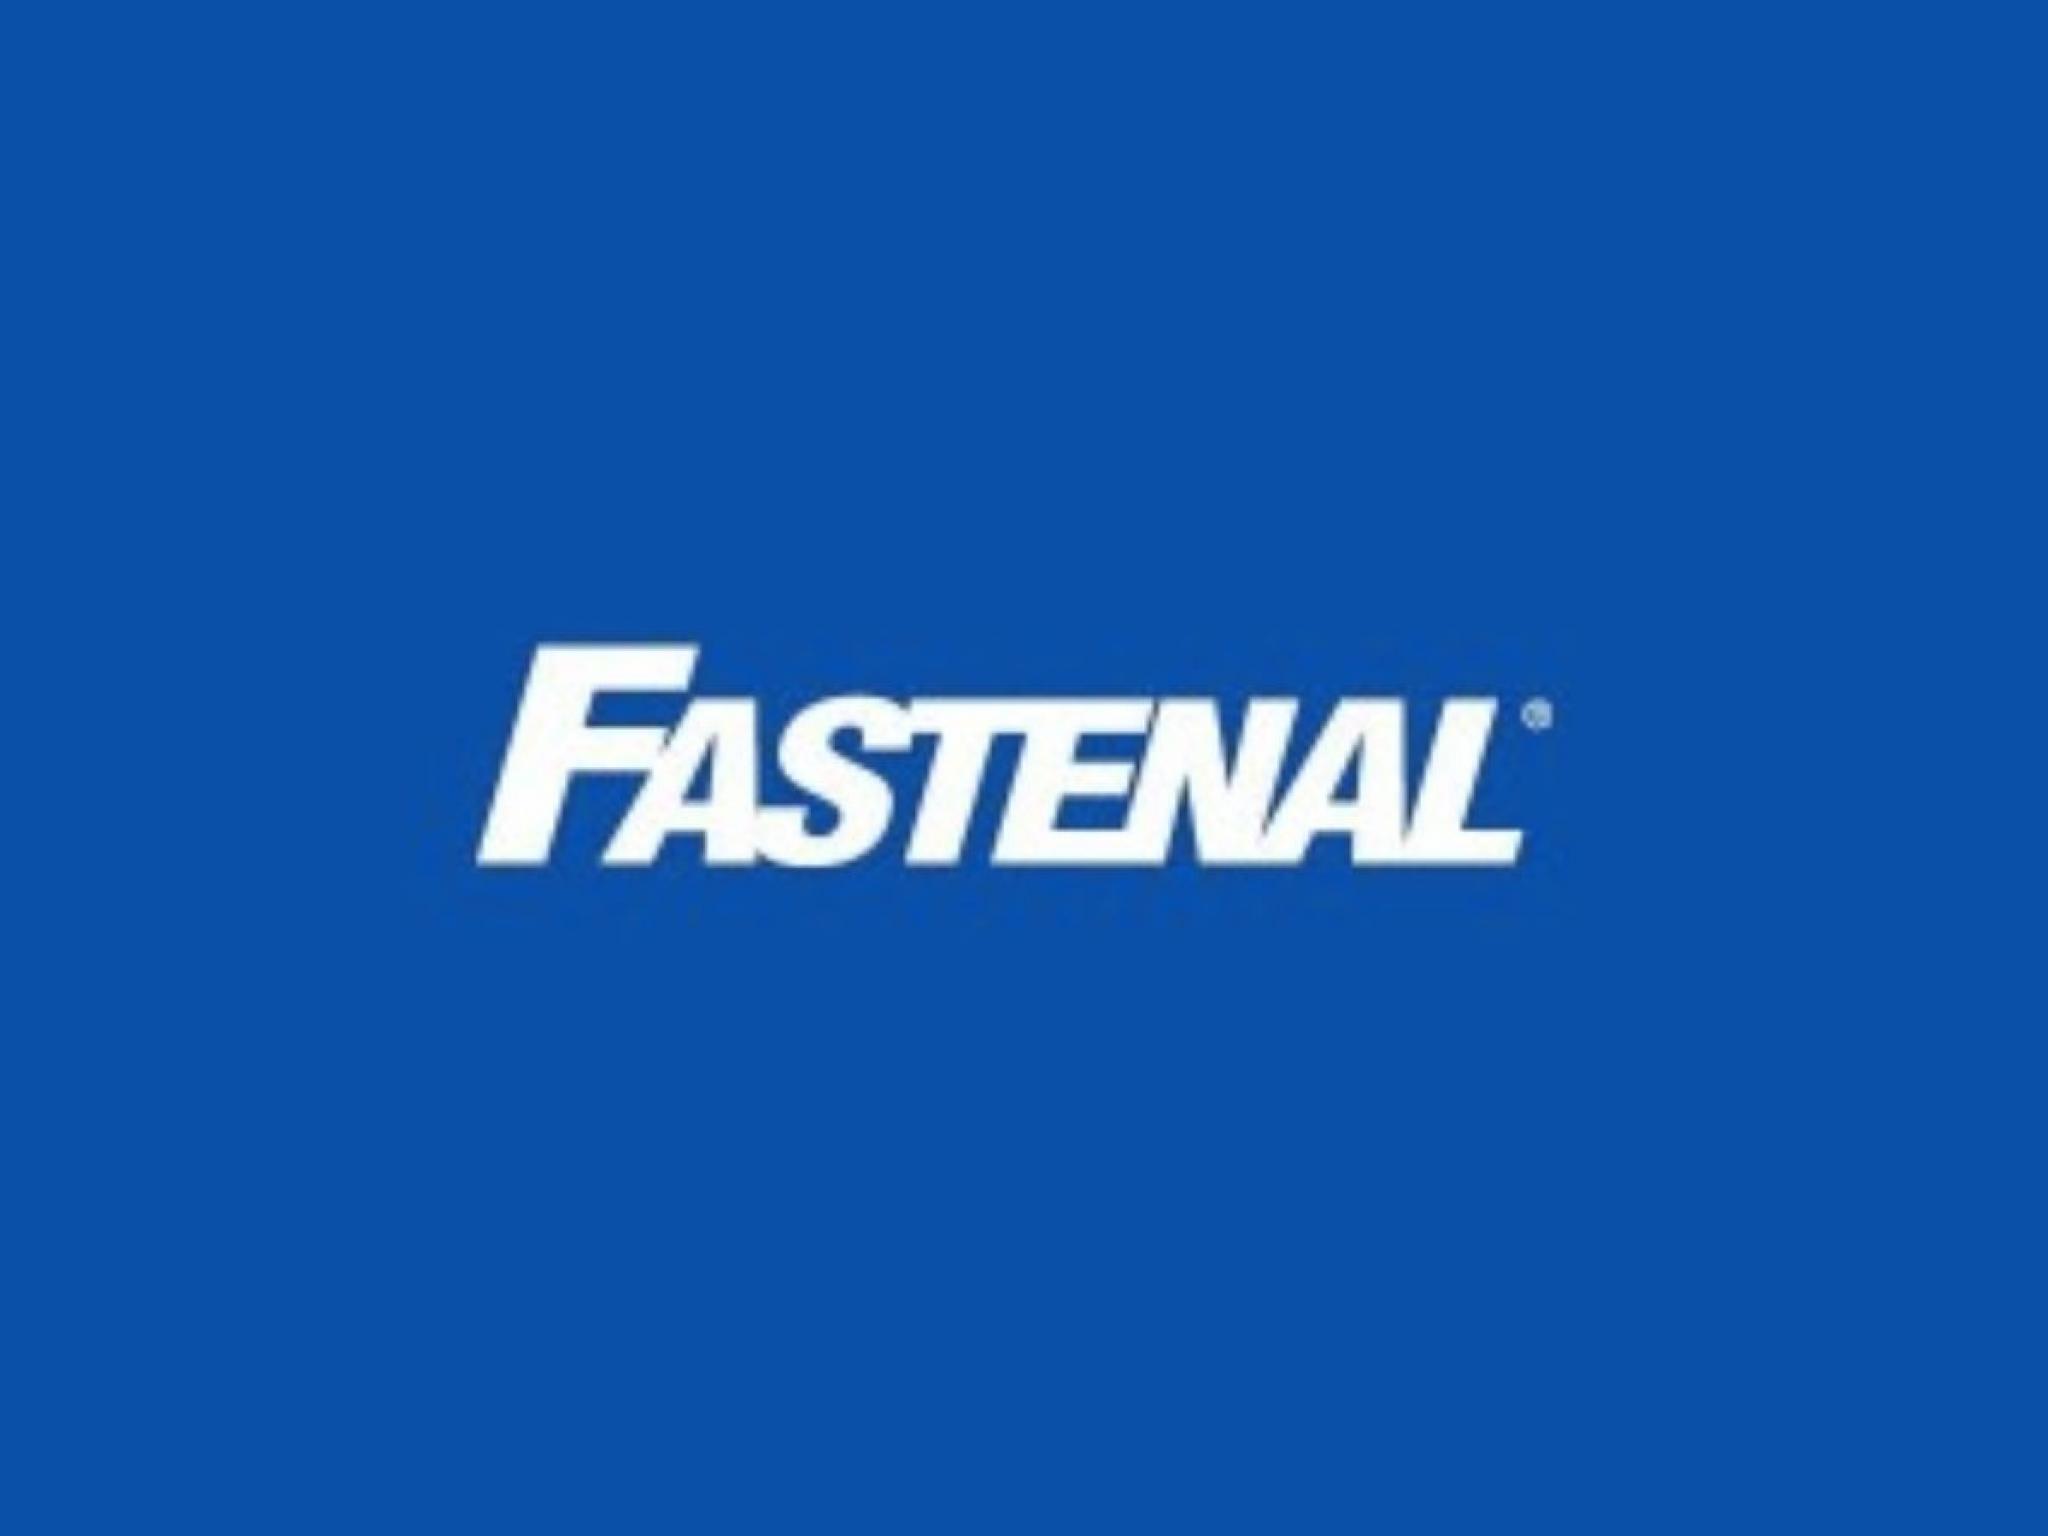  fastenal-gears-up-for-q1-print-here-are-the-recent-forecast-changes-from-wall-streets-most-accurate-analysts 